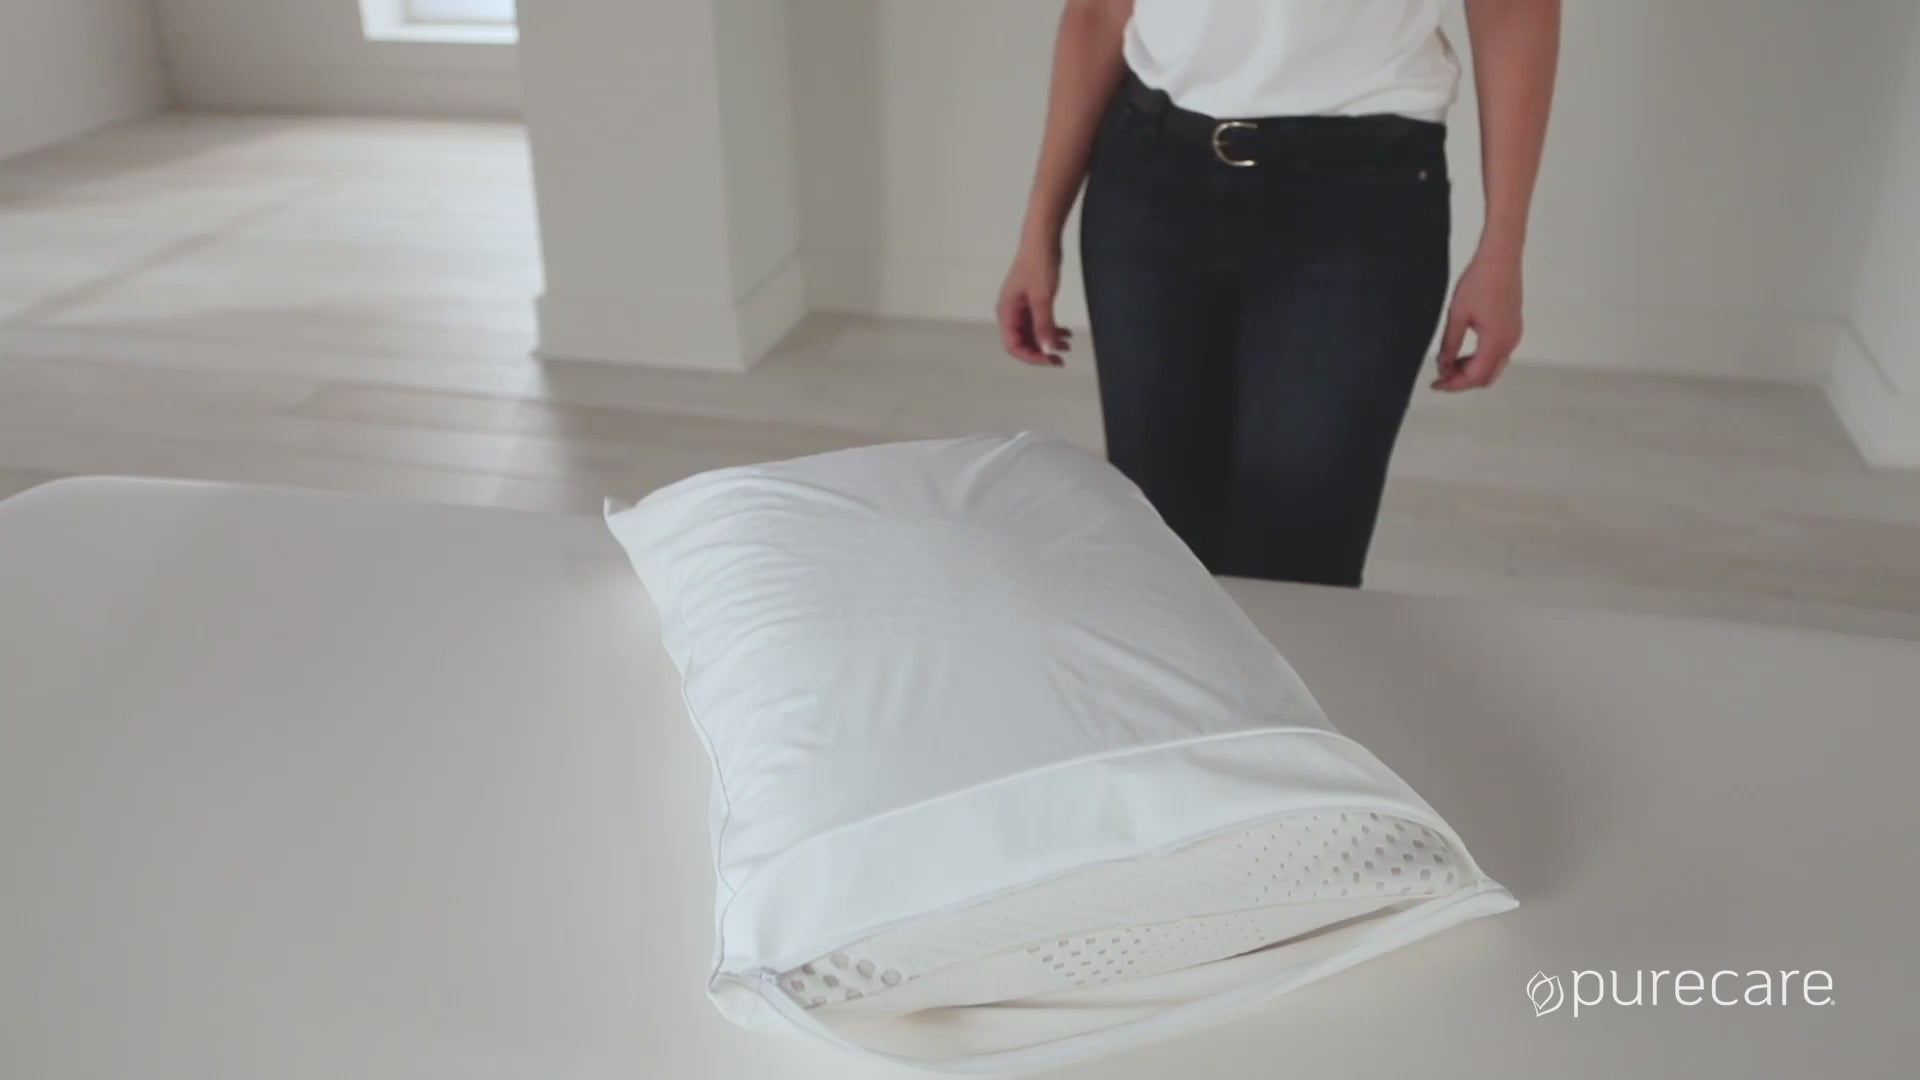 Frio Cooling Pillow Protector by Purecare Video